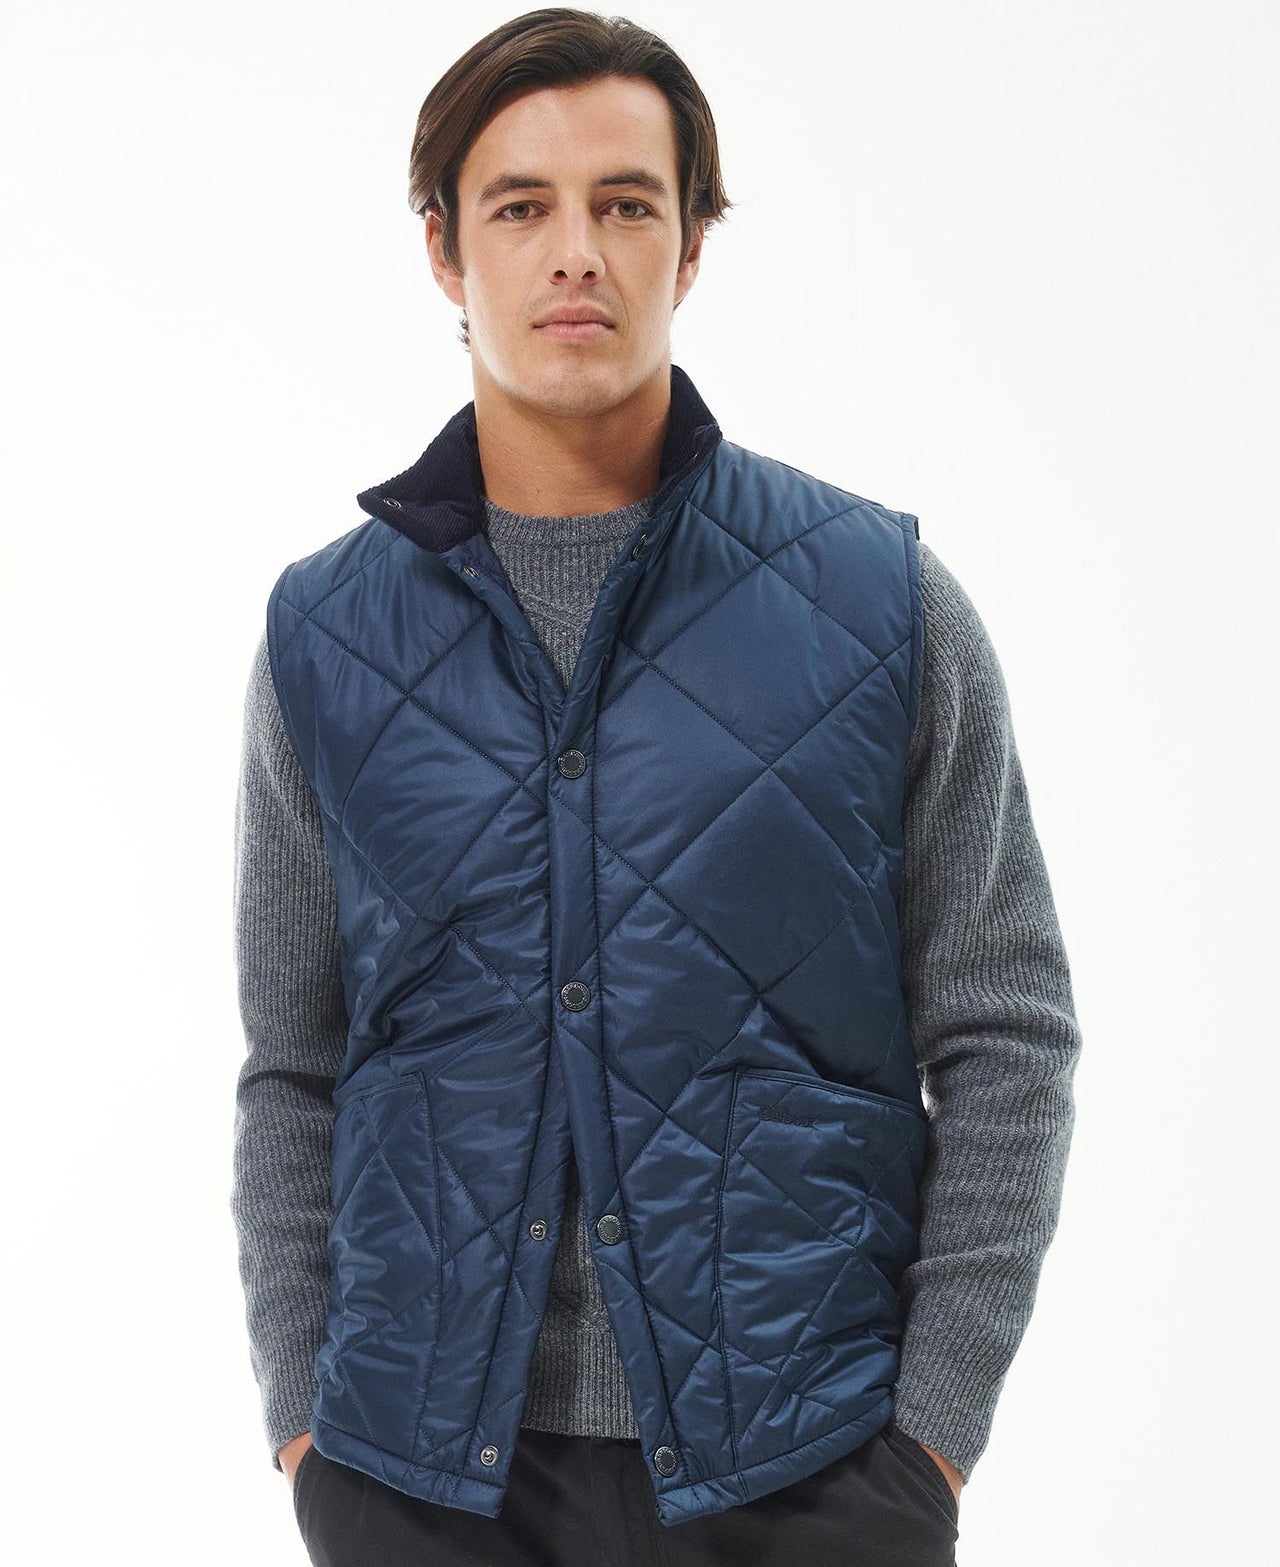 Barbour Liddesdale Classic Navy Gilet